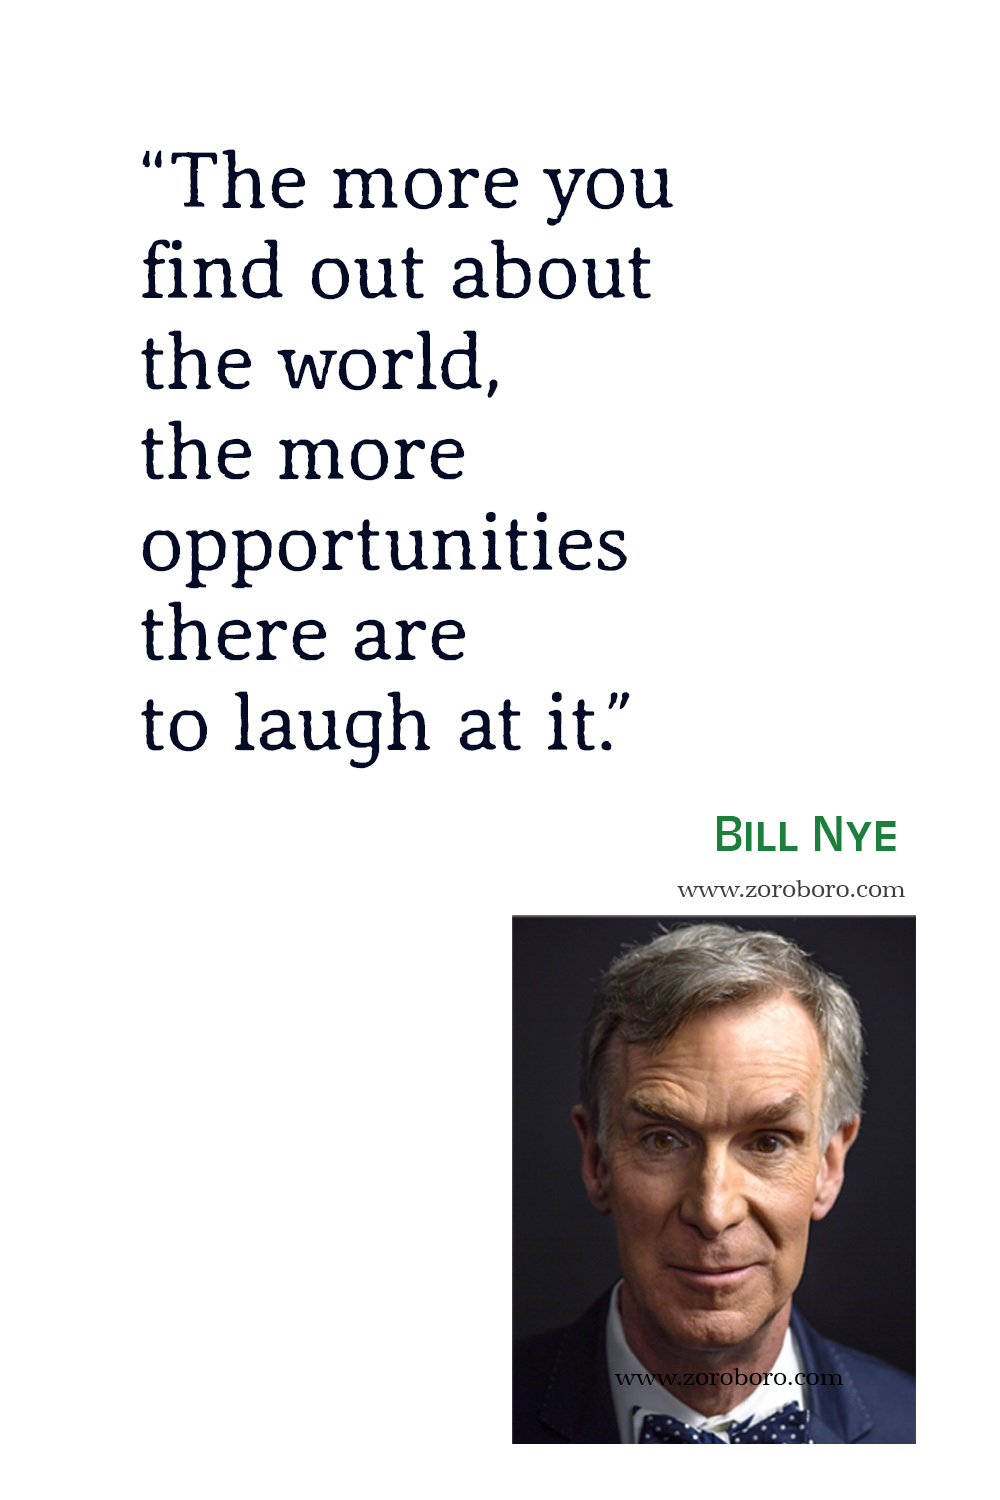 Bill Nye Quotes, Bill Nye Science, Bill Nye Undeniable: Evolution and the Science of Creation, Bill Nye Books, Movies, T.v Shows.